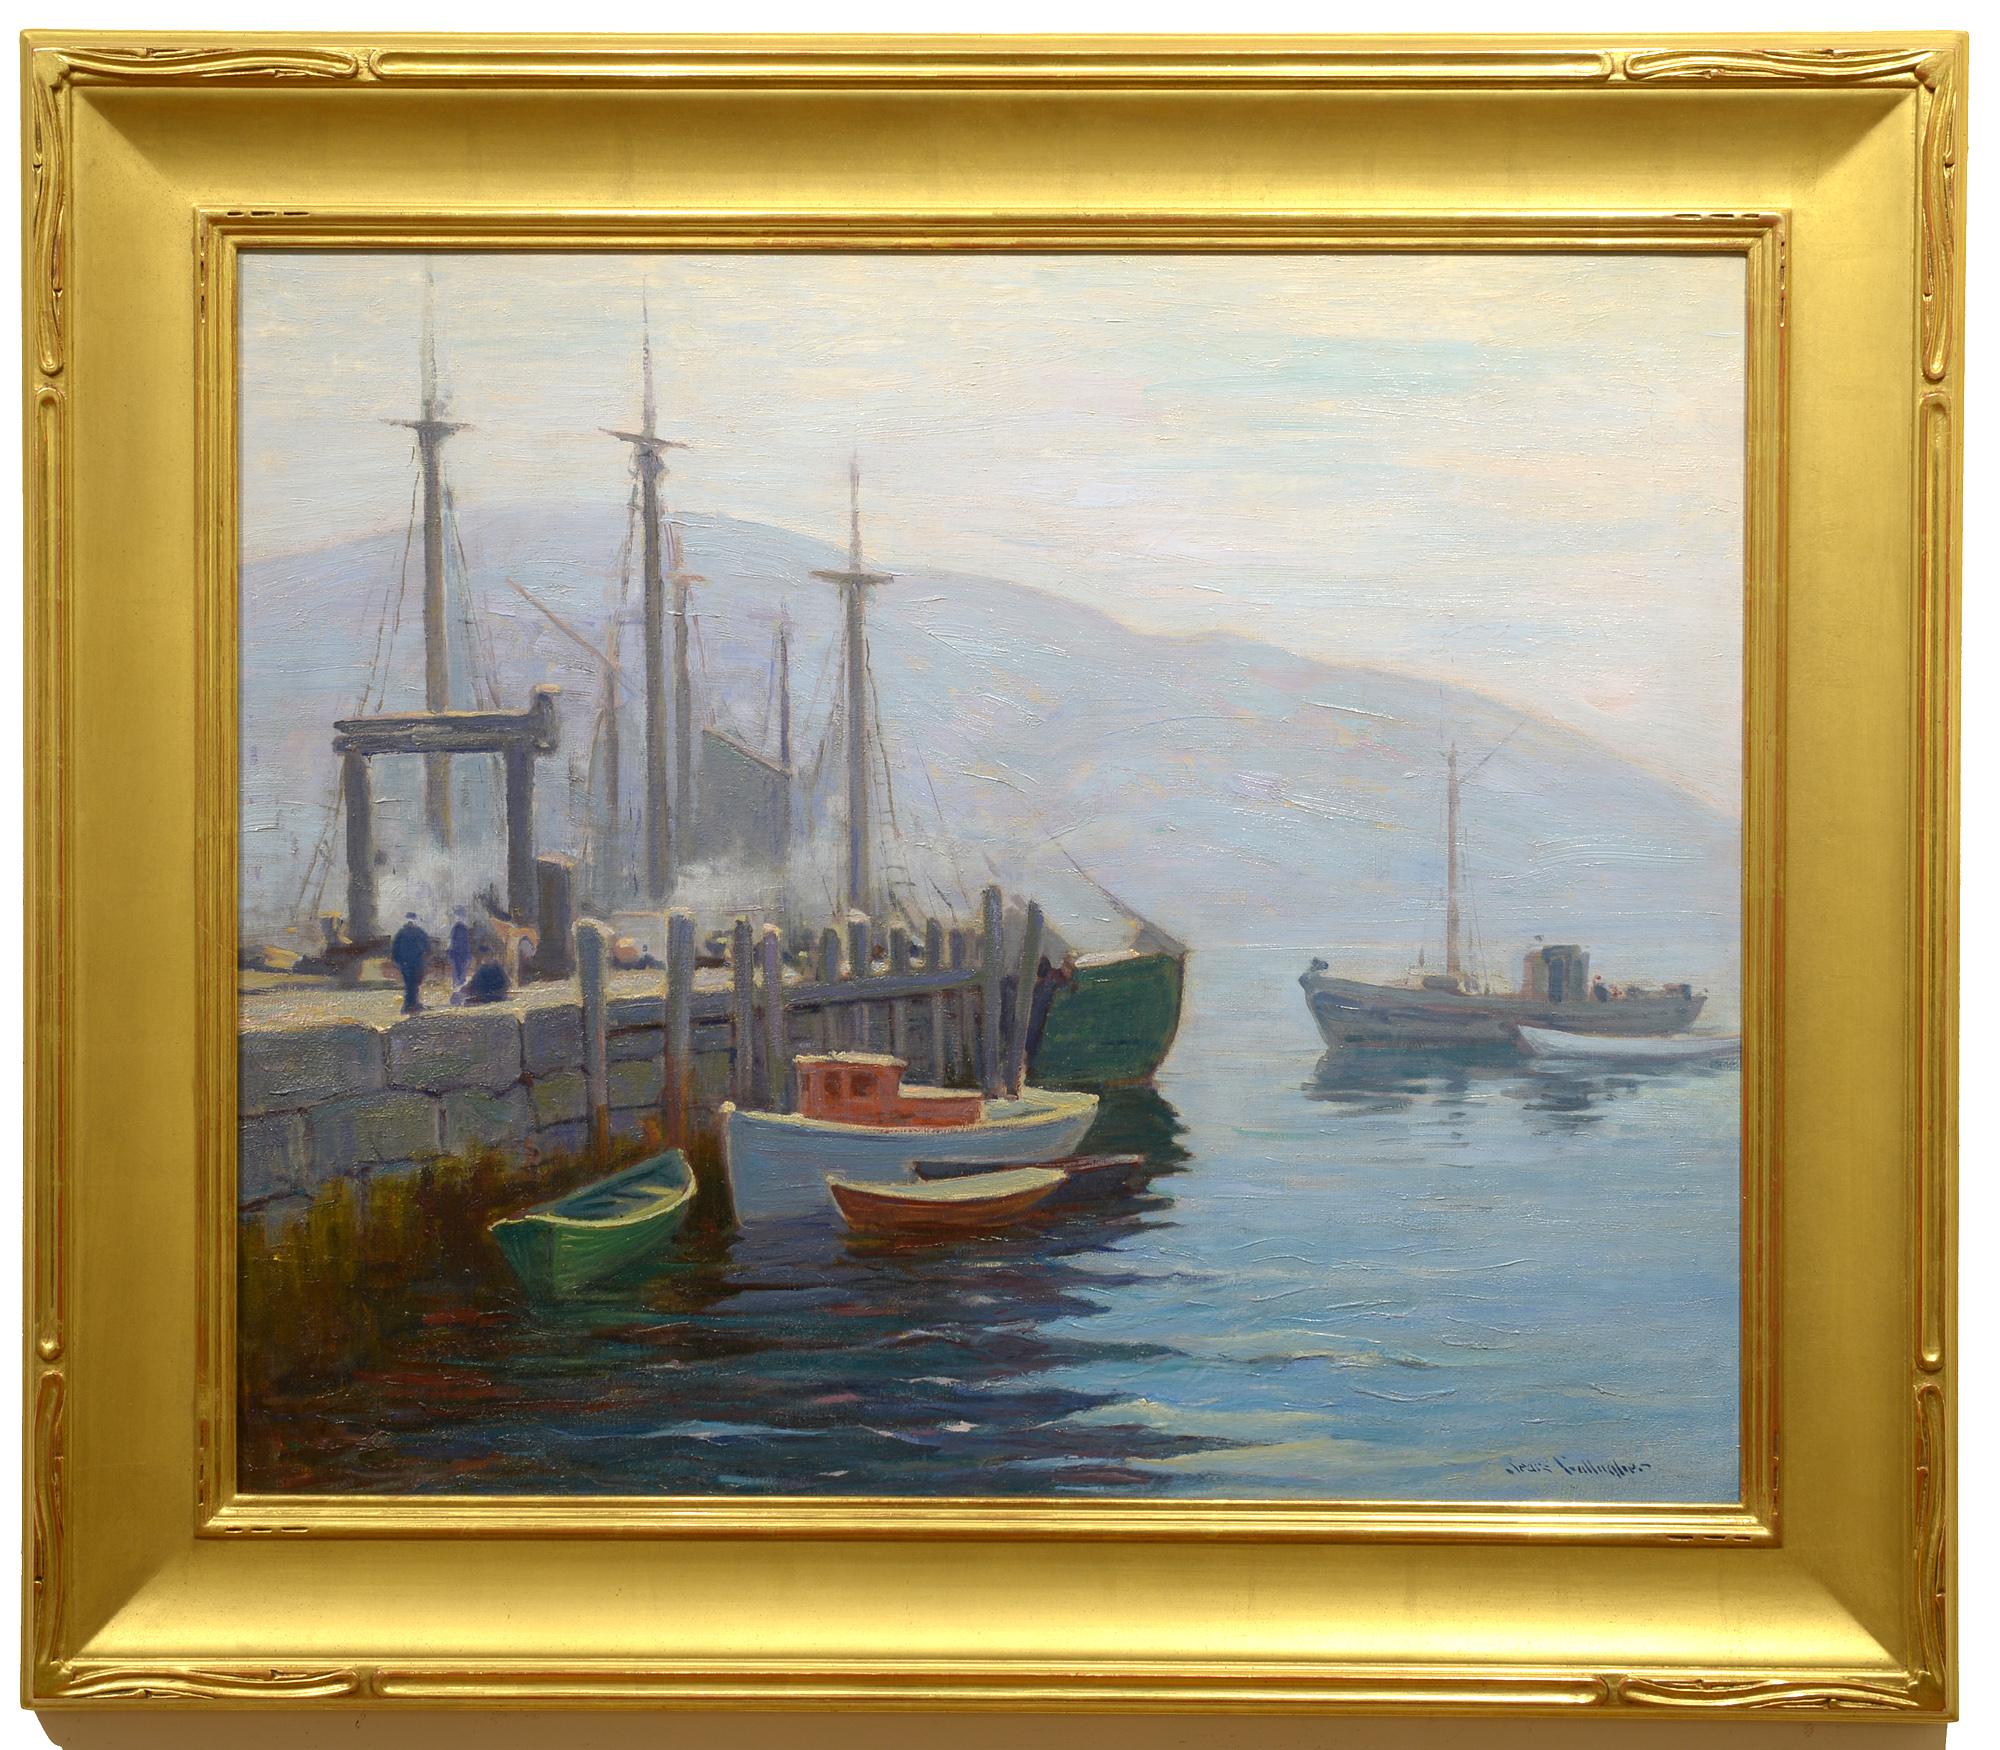 Misty Morning, Monhegan Harbor - Painting by Sears Gallagher